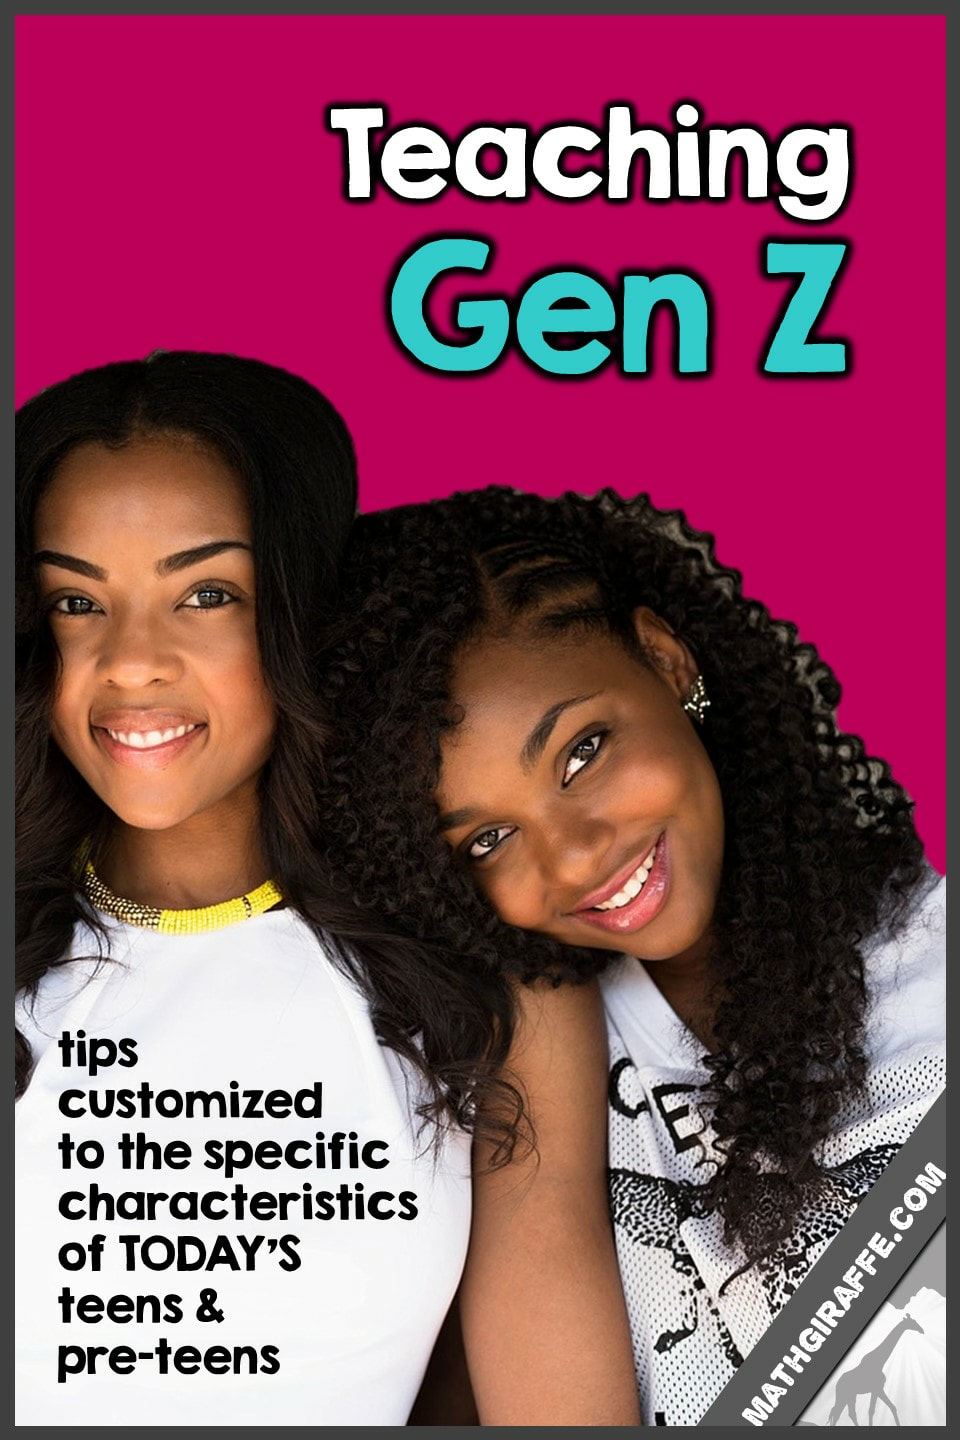 How to Adjust Educational Methods Toward the Strengths, Needs, and Characteristics of Generation Z